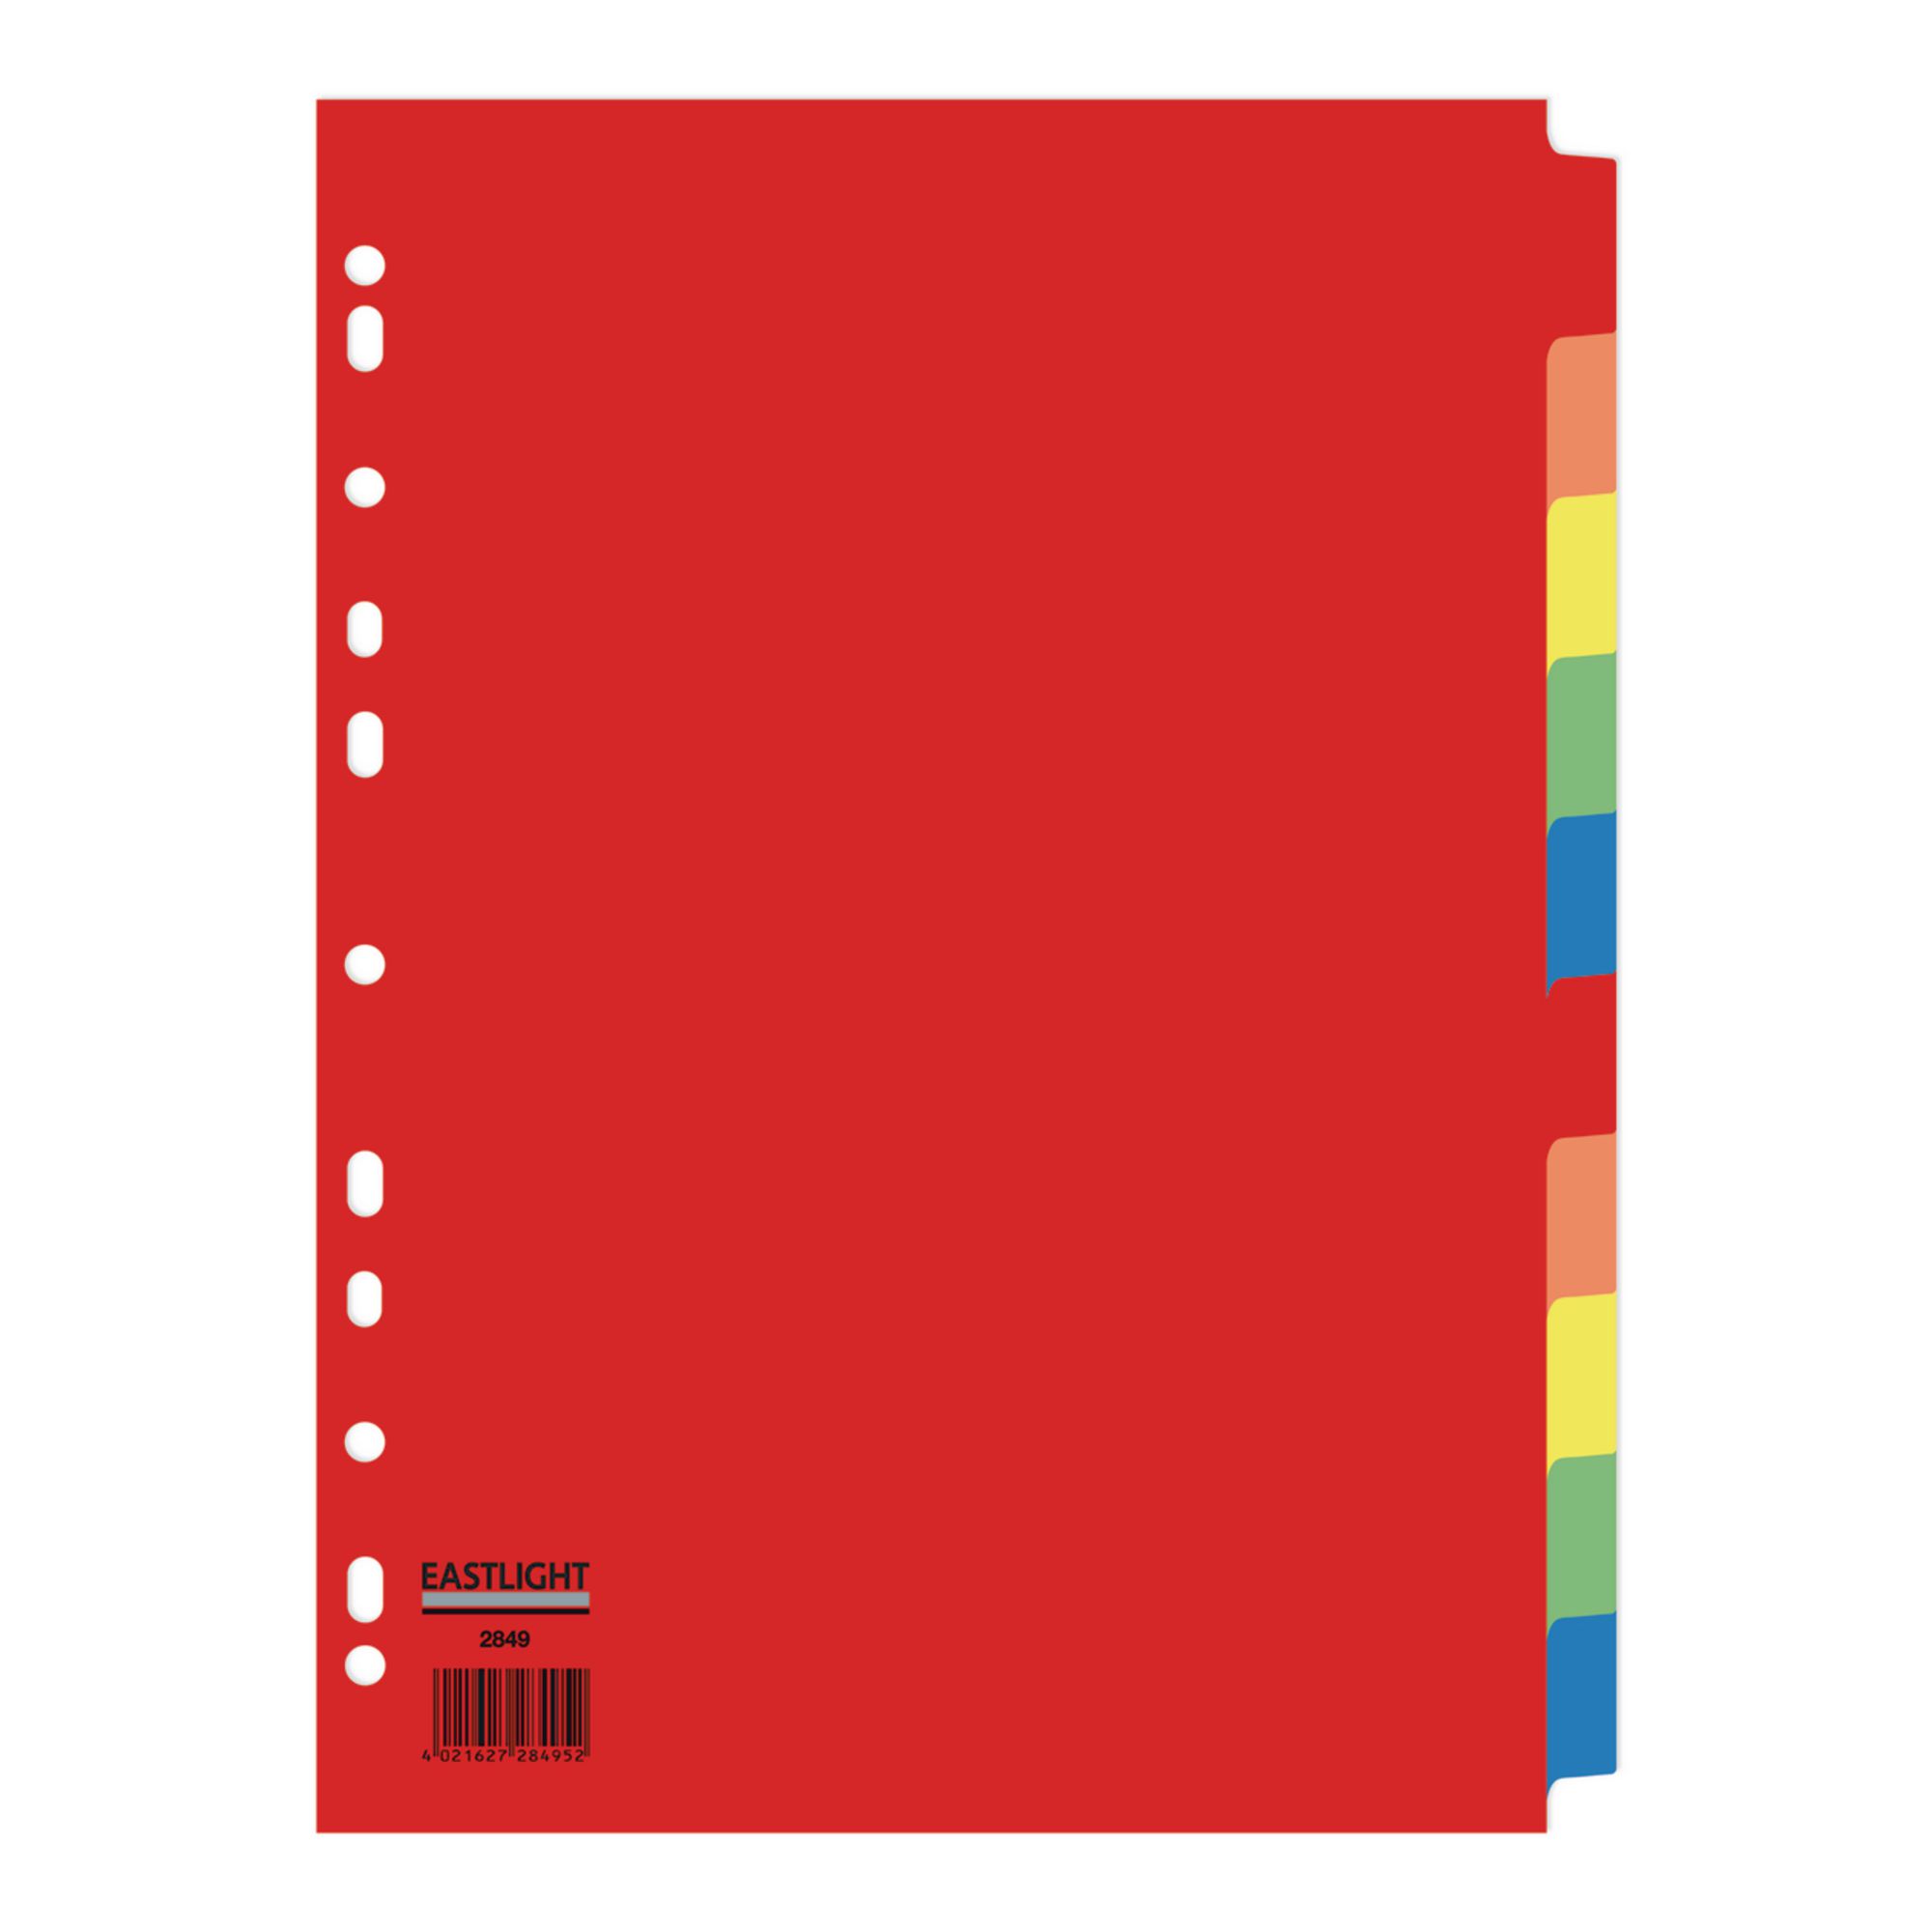 EASTLIGHT 10 Part Europunched Subject Dividers - A4 - Pack of 1